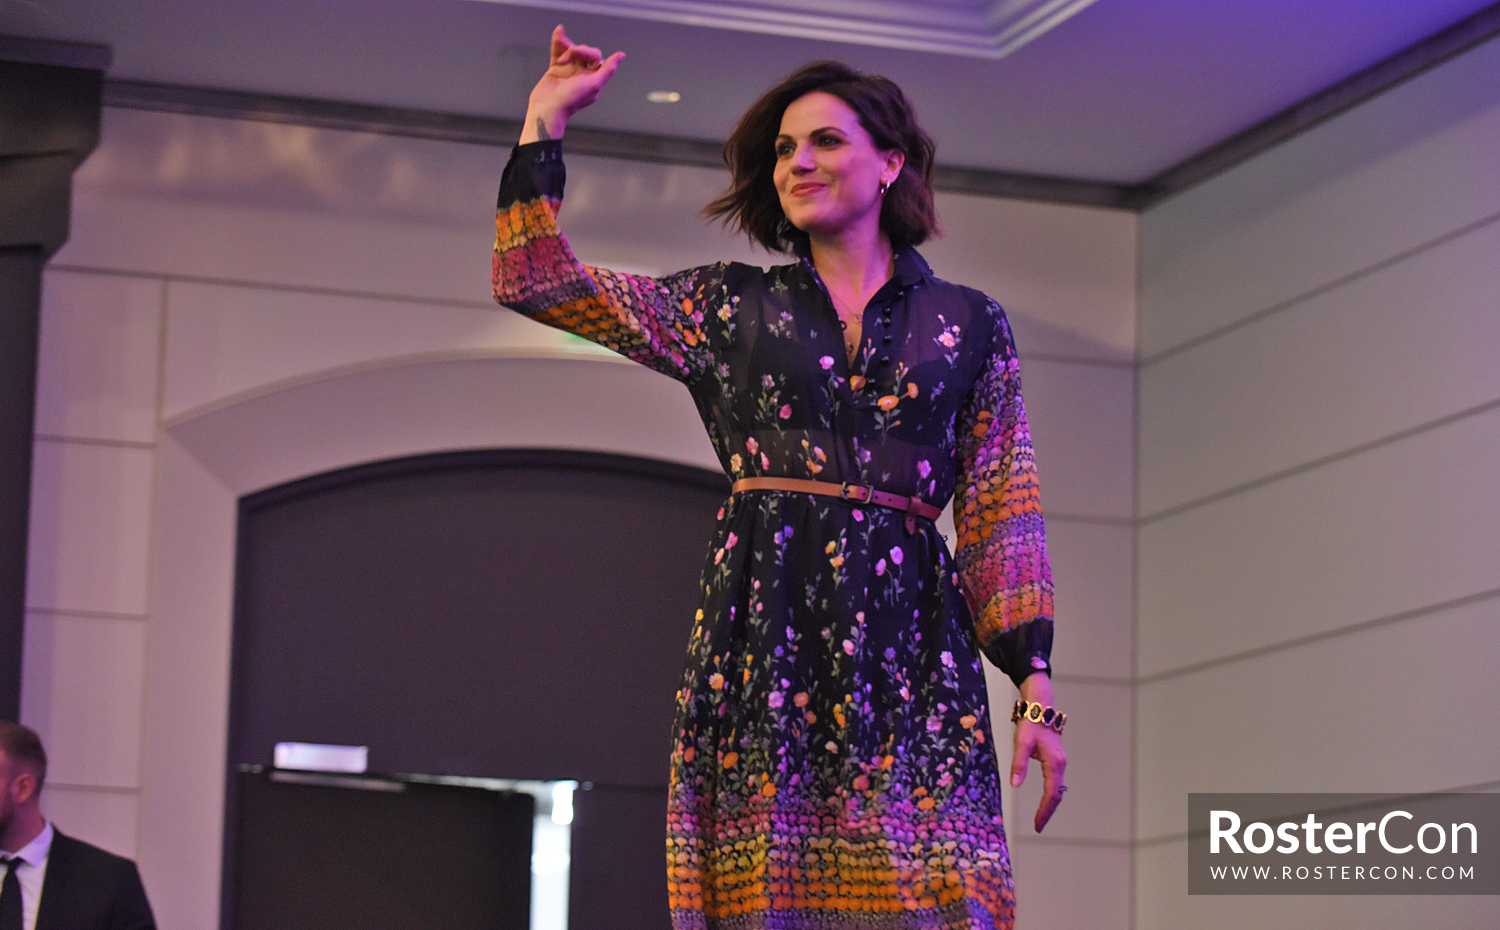 Lana Parrilla - The Happy Ending Convention 2 - Once Upon A Time